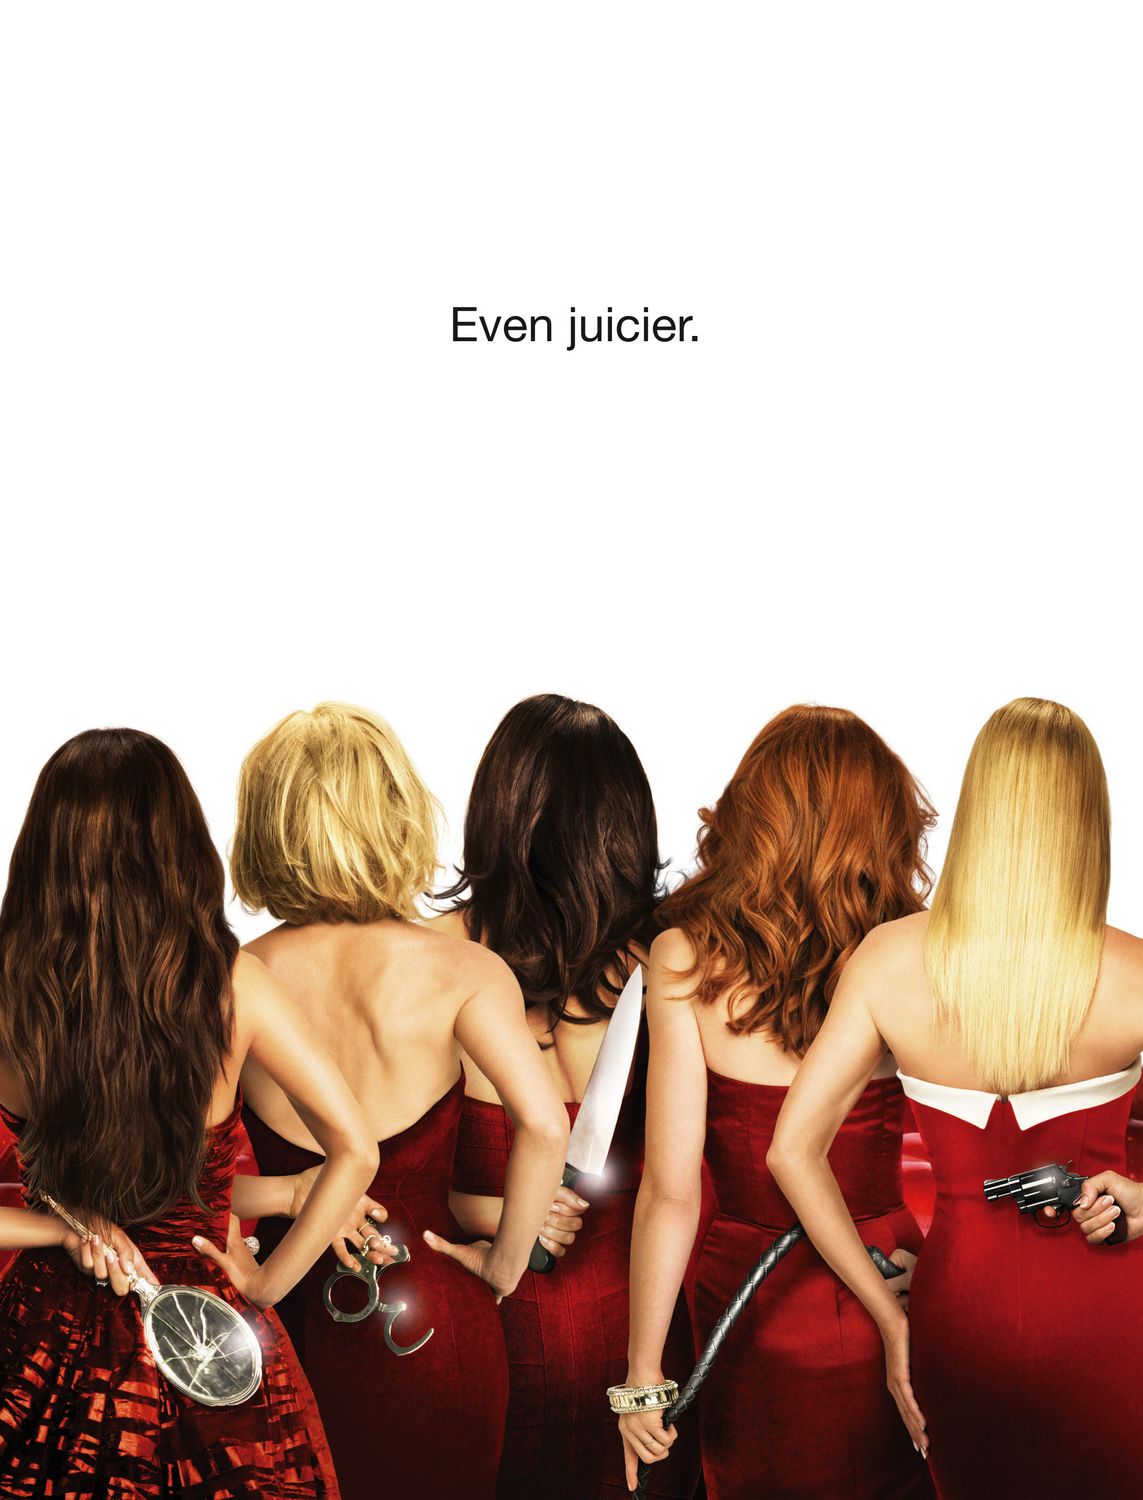 Extra Large TV Poster Image for Desperate Housewives (#6 of 13)